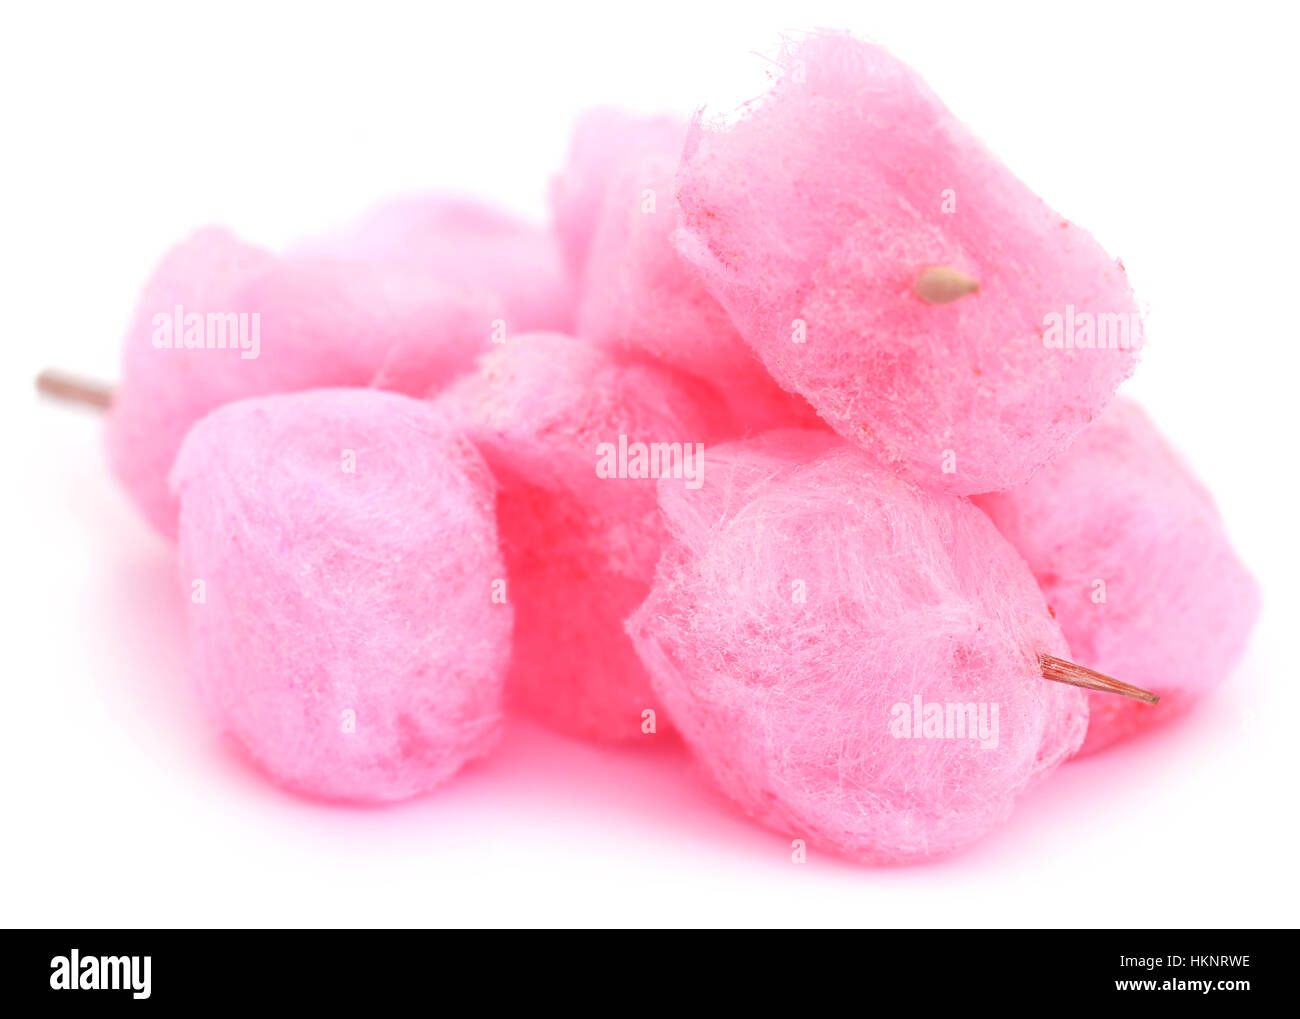 Fluffy background texture Cut Out Stock Images & Pictures - Alamy